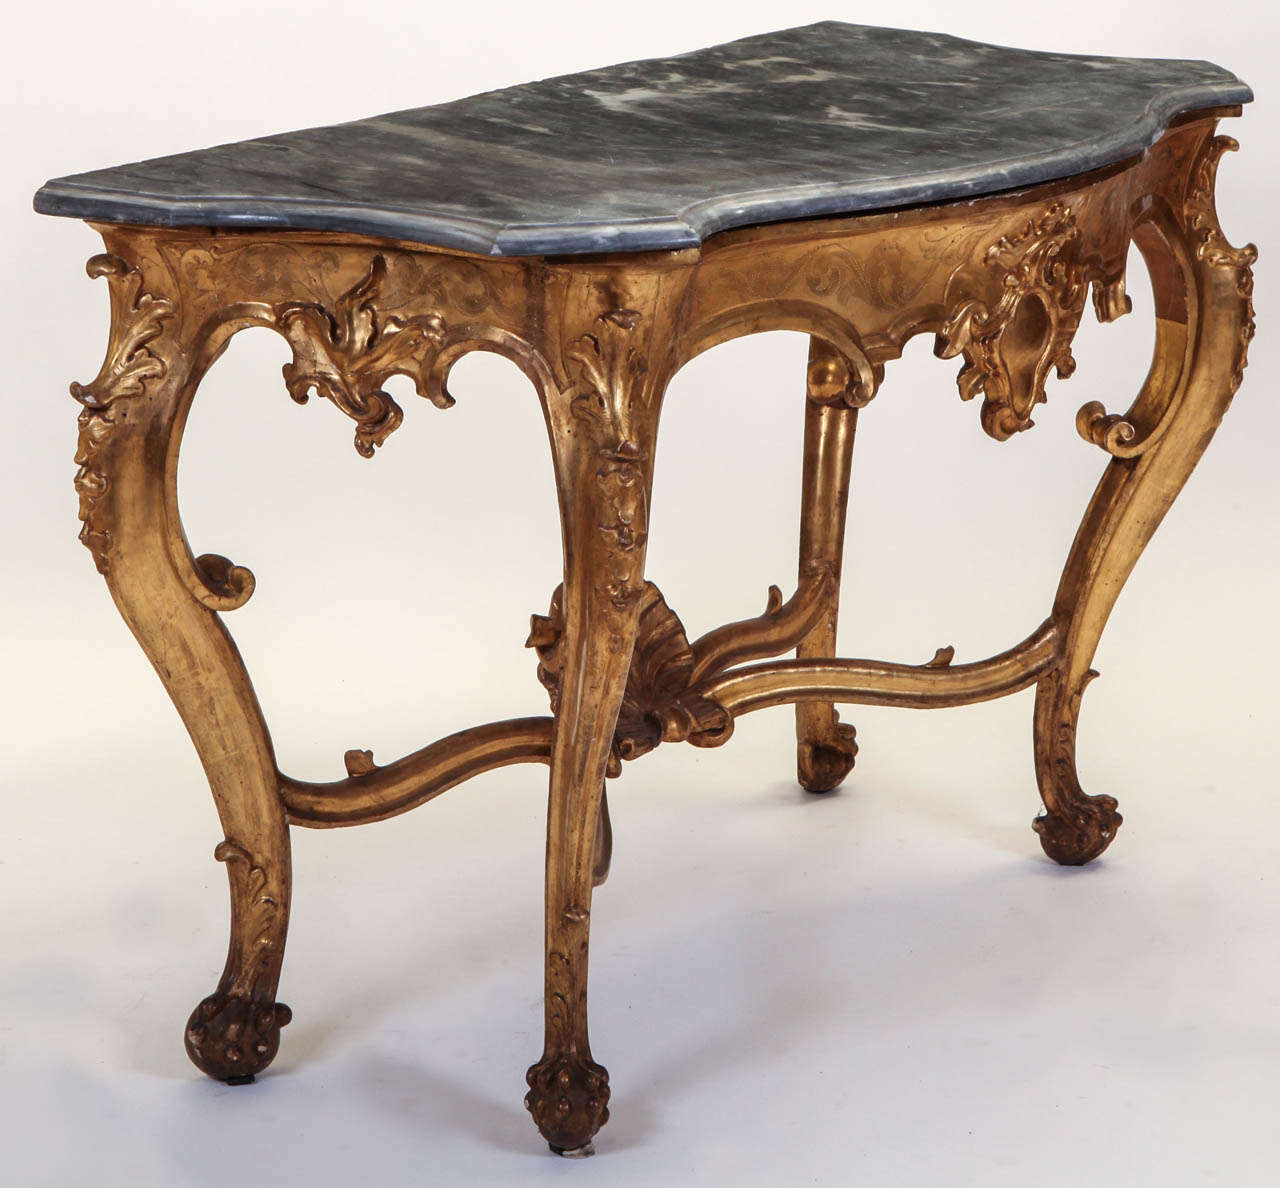 A fine Italian, 19th century, giltwood console table with a grey veneered marble top.